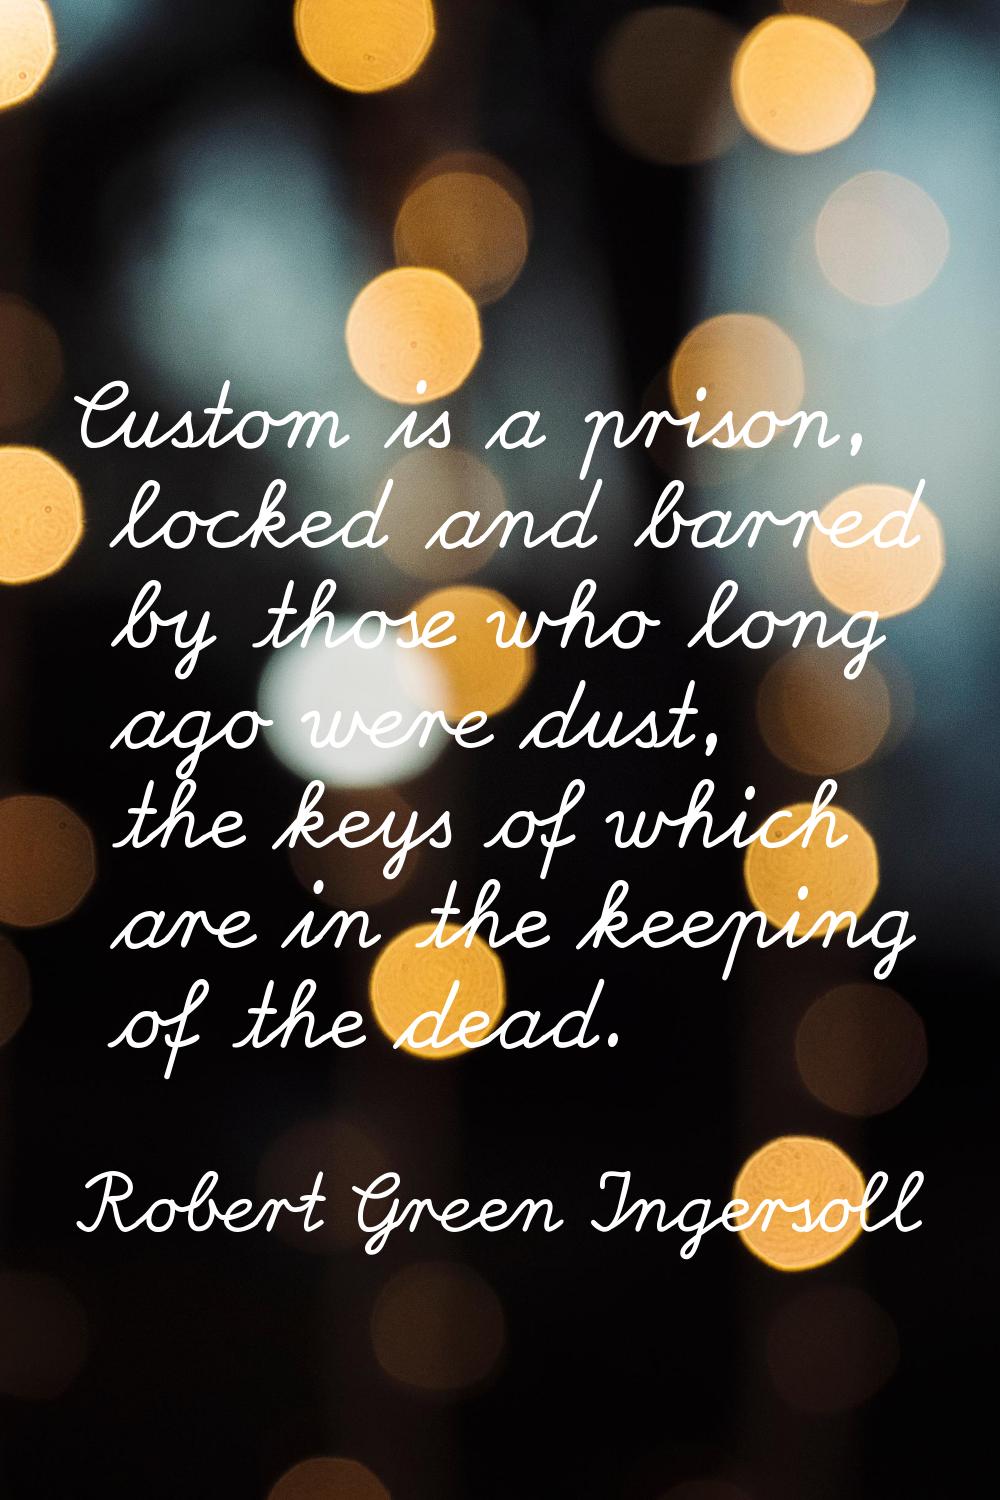 Custom is a prison, locked and barred by those who long ago were dust, the keys of which are in the